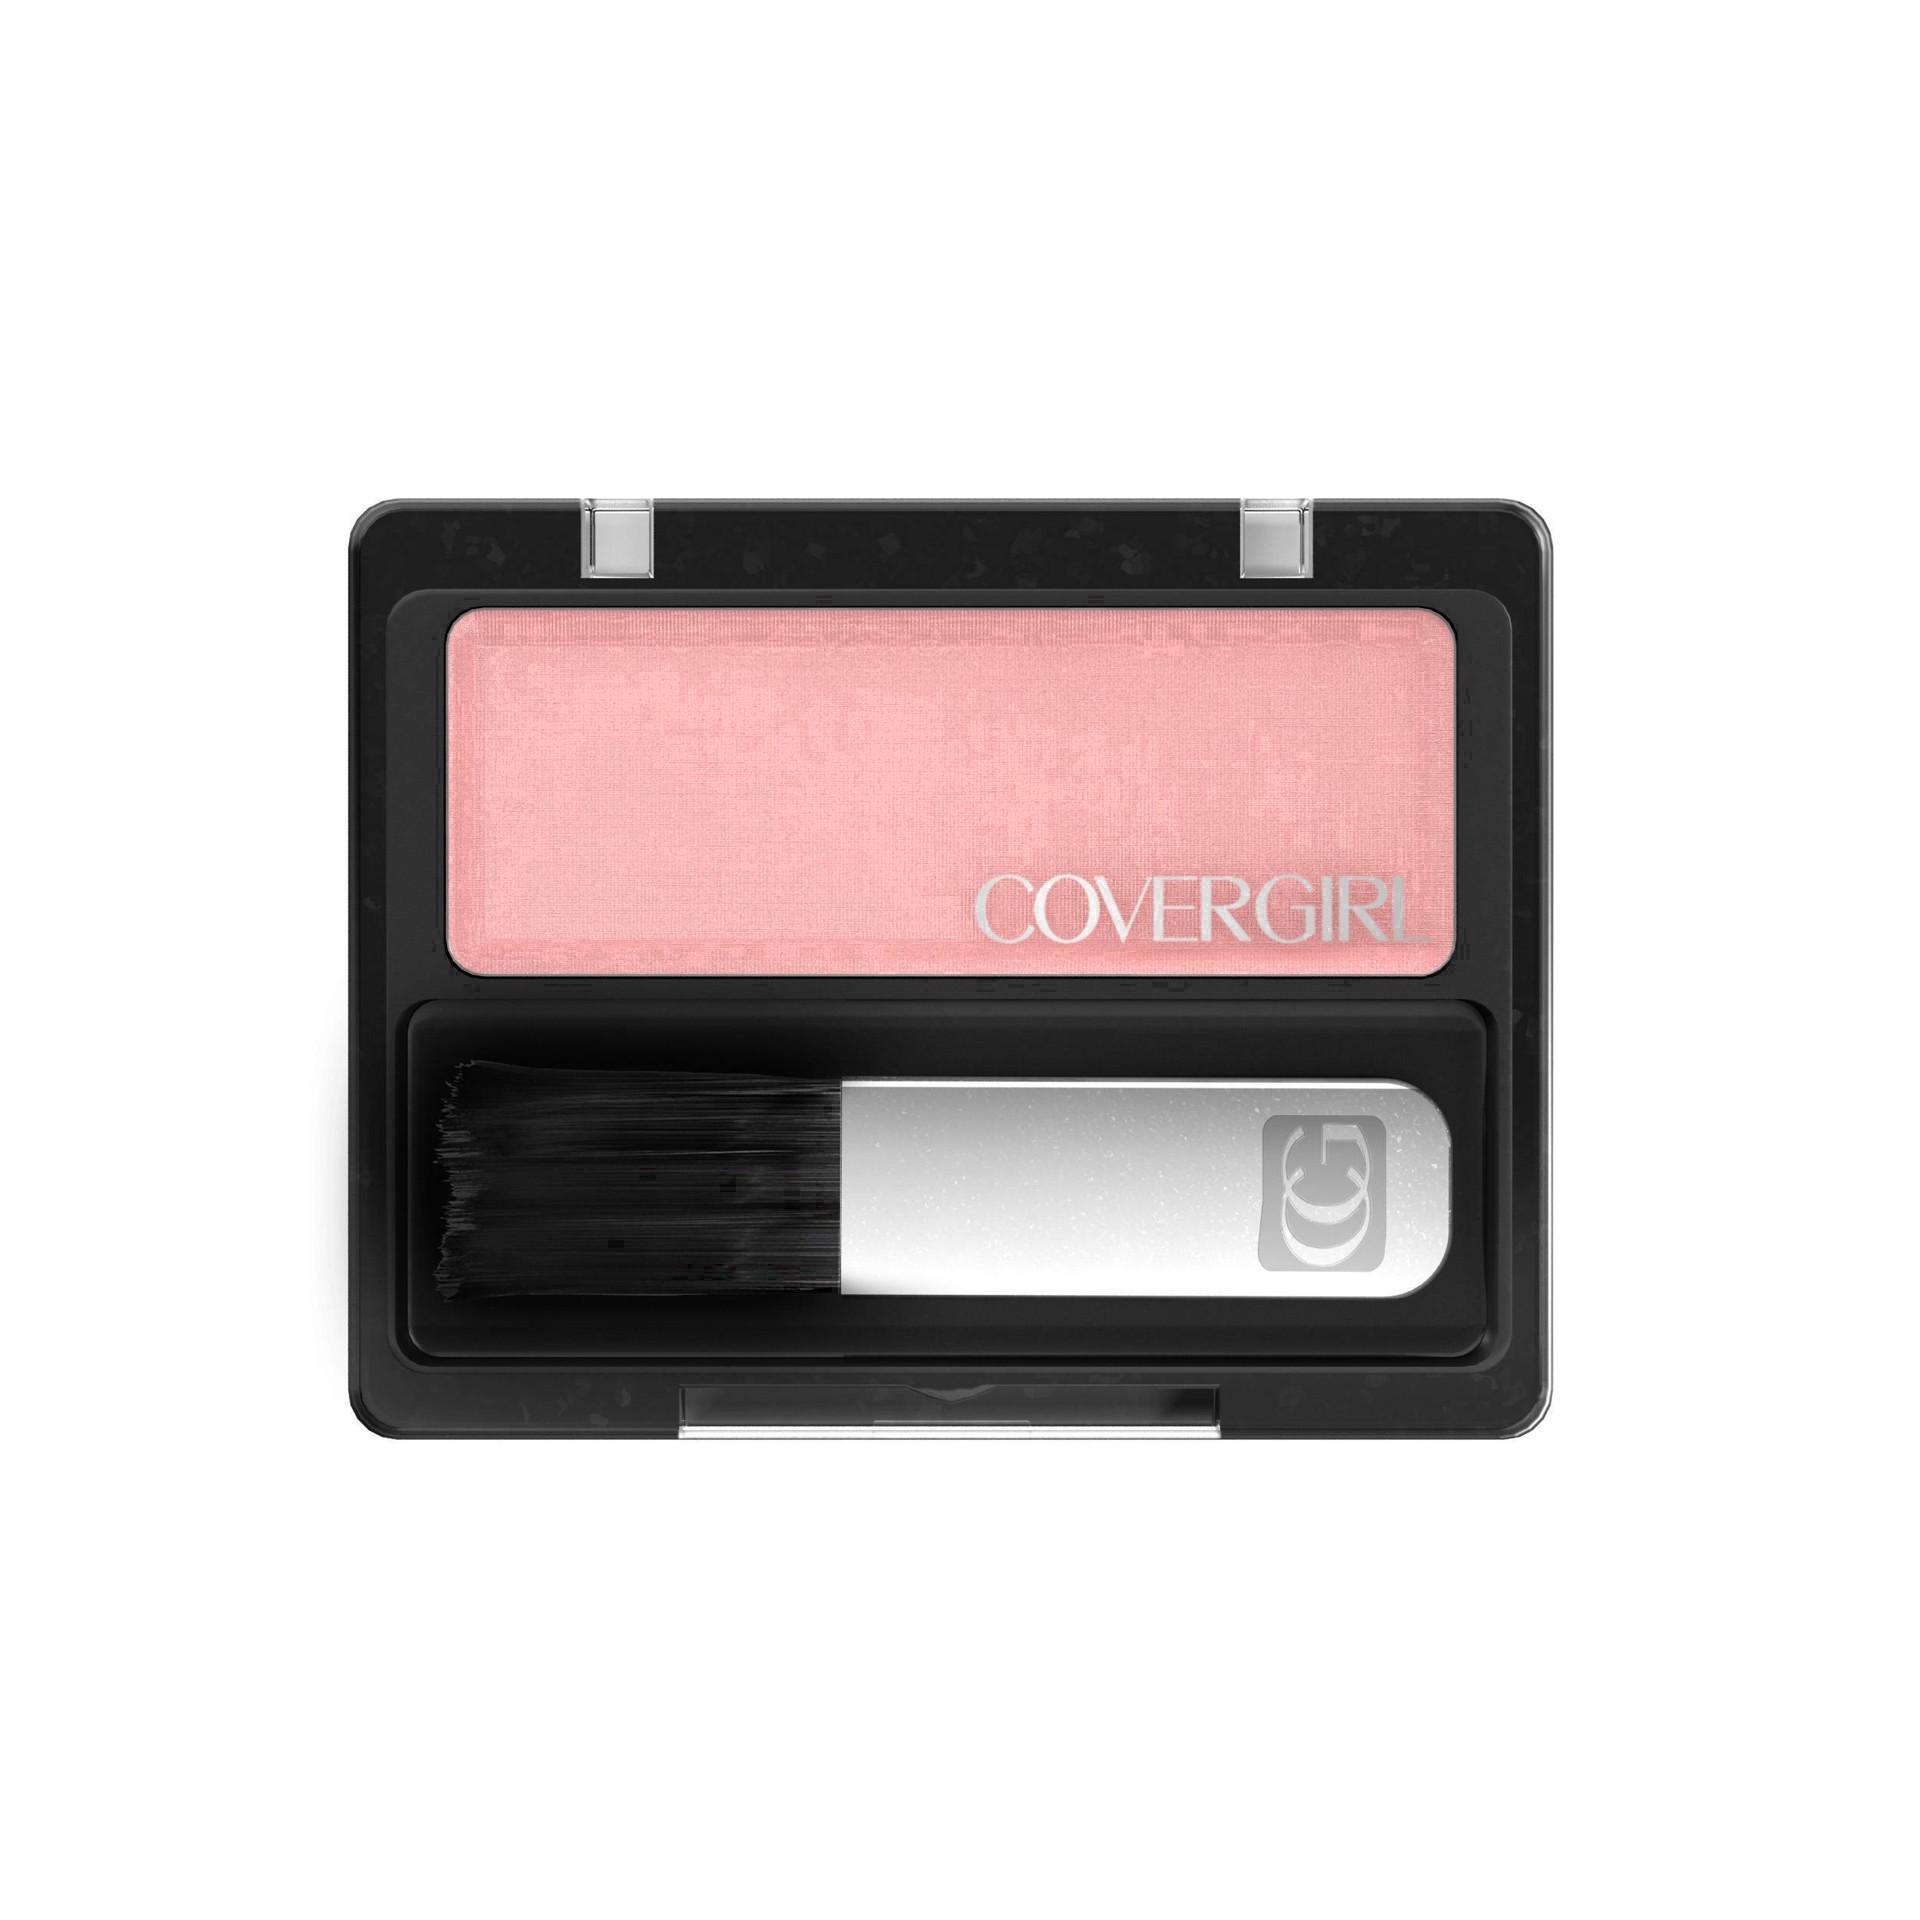 slide 8 of 42, Covergirl COVERGIRL Classic Color Blush Rose Silk, 1 ct